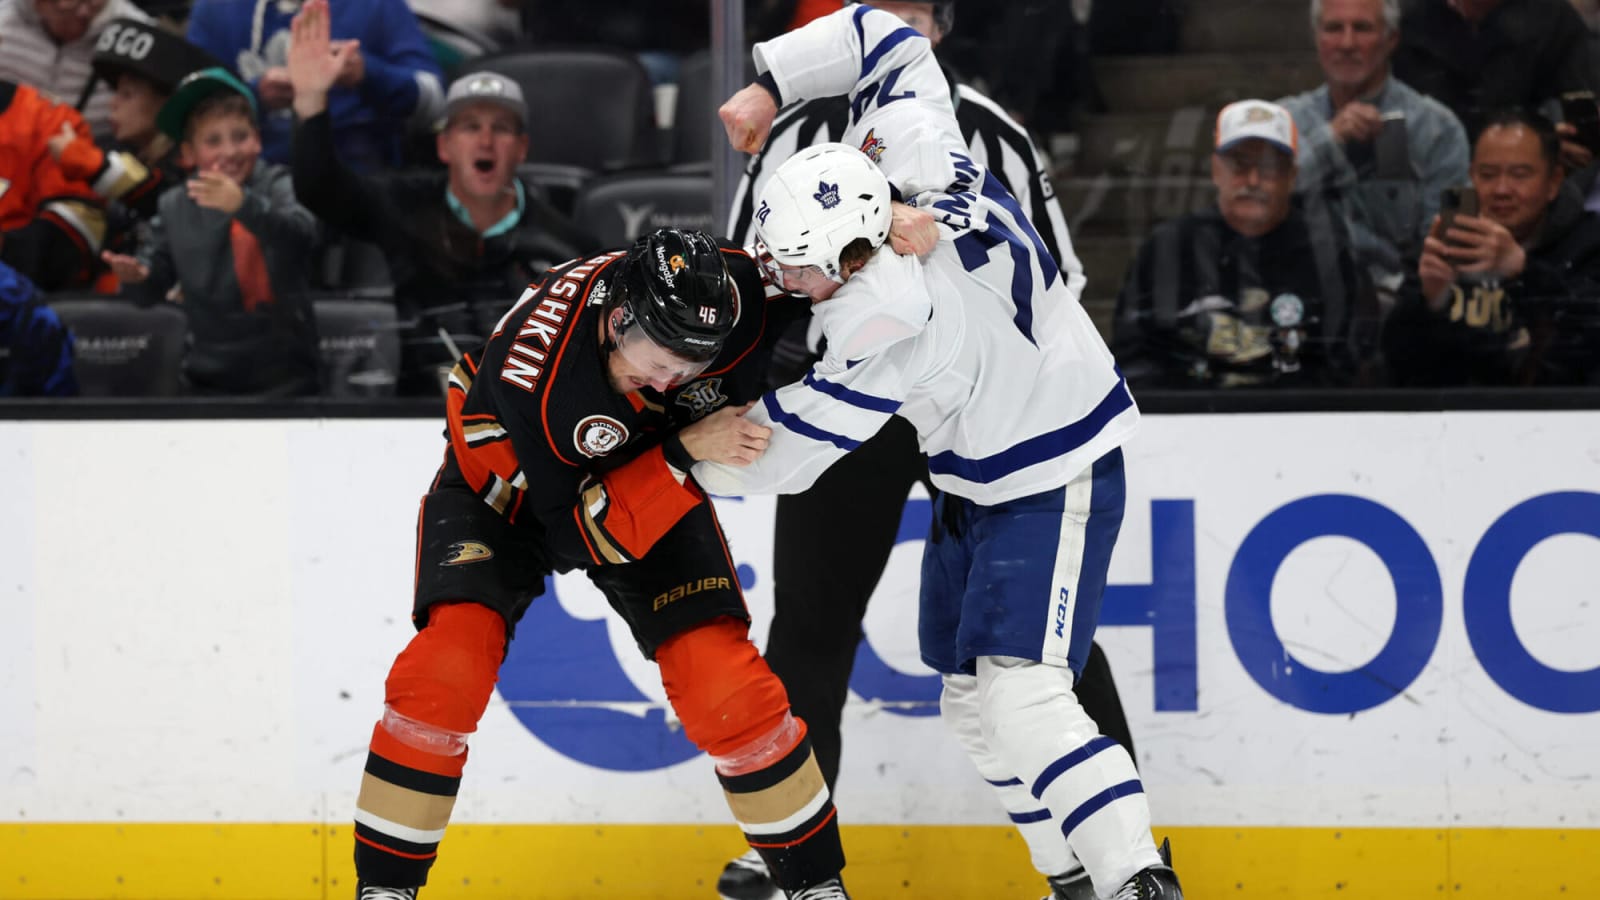 Bobby McMann is a chance to undo the Maple Leafs Trevor Moore & Mason Marchment wrongs